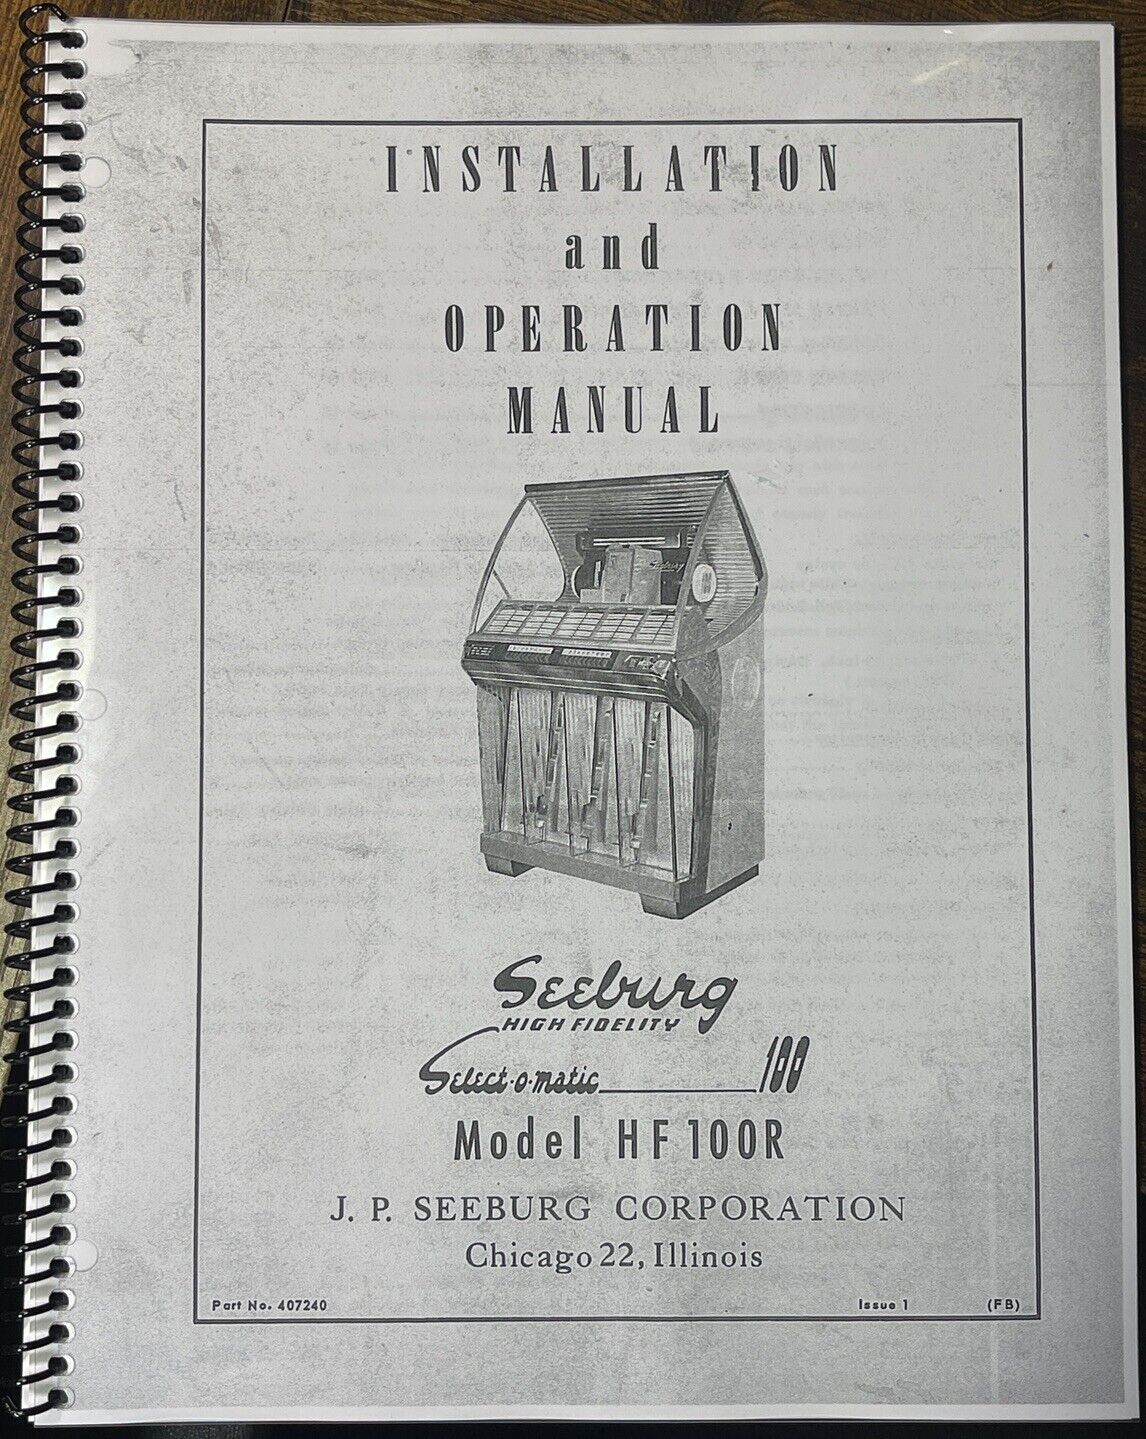 *NEW* Seeburg Model R Installation And Operation Manual